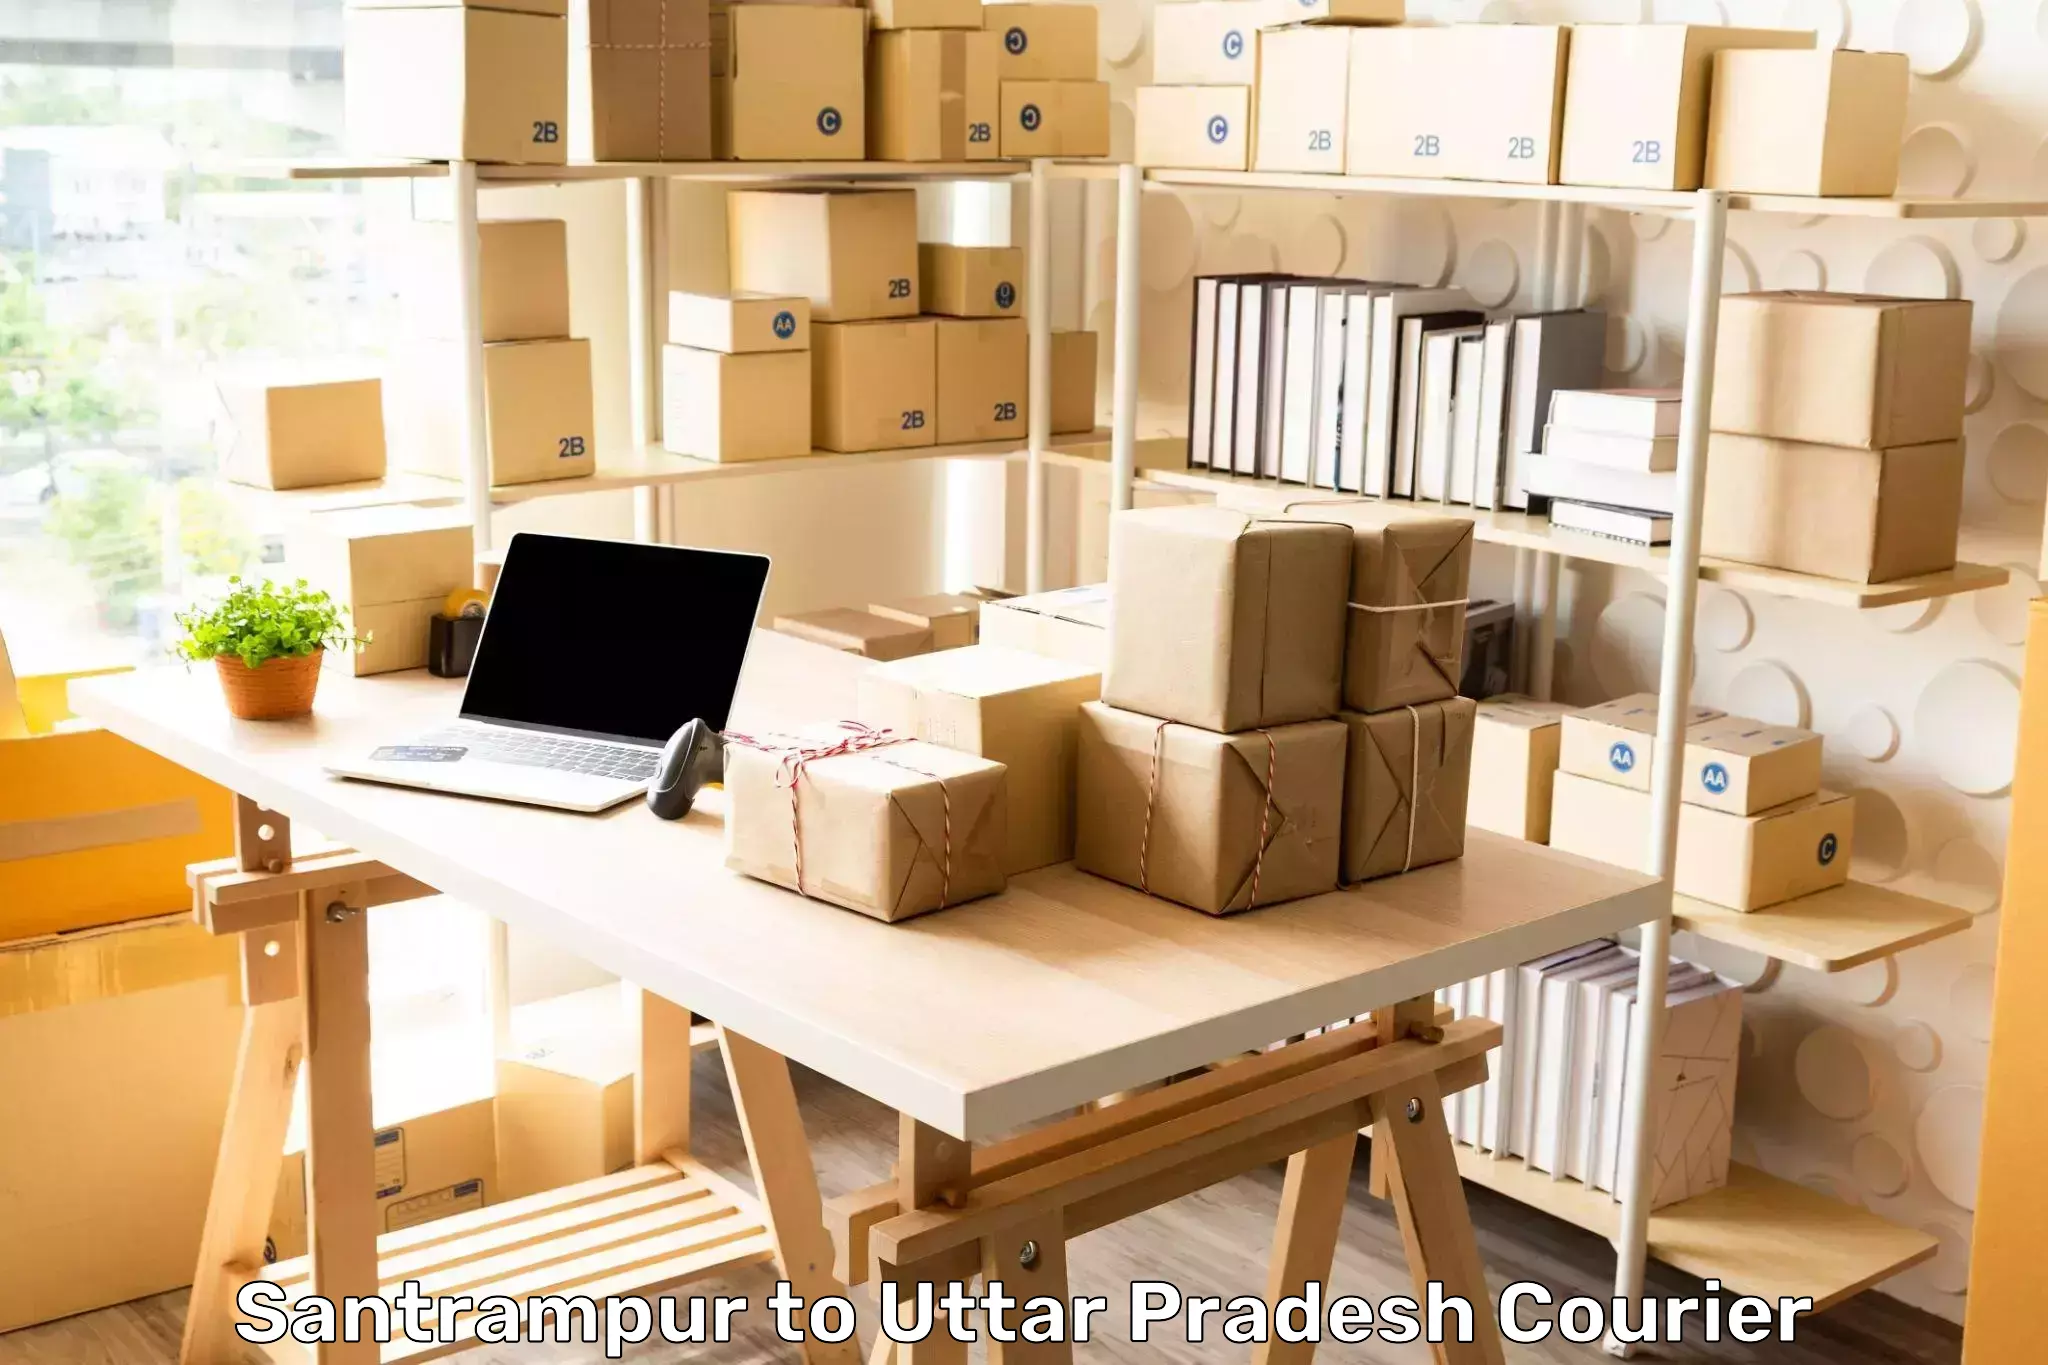 State-of-the-art courier technology Santrampur to Afzalgarh